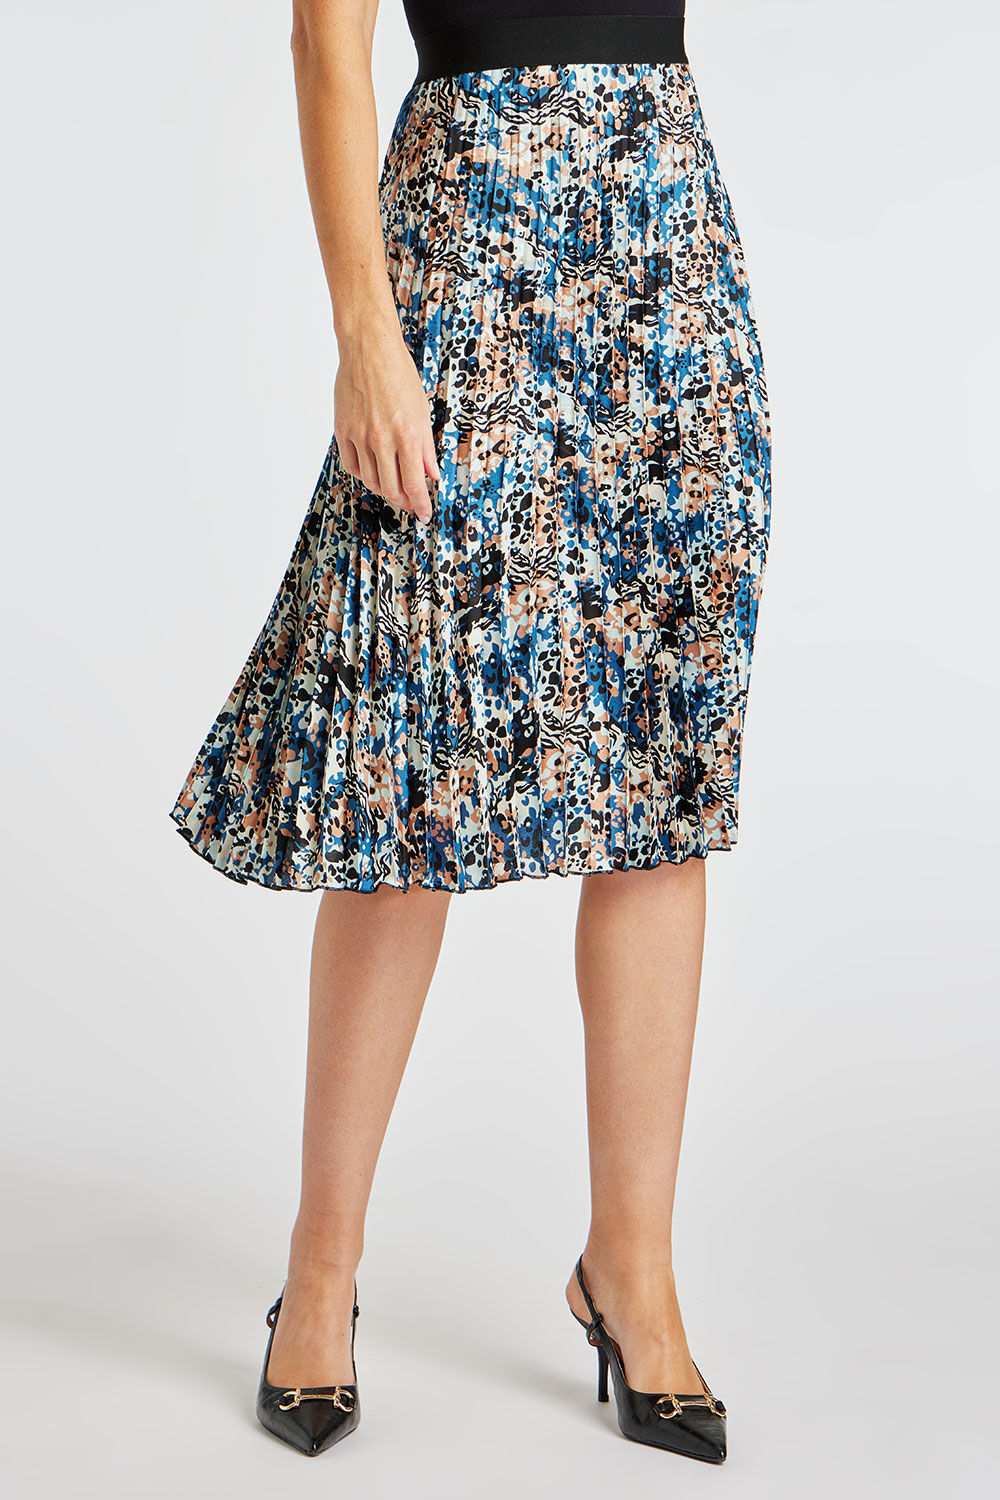 Bonmarche Brown Animal Patchwork Print Elasticated Pleated Skirt, Size: 12